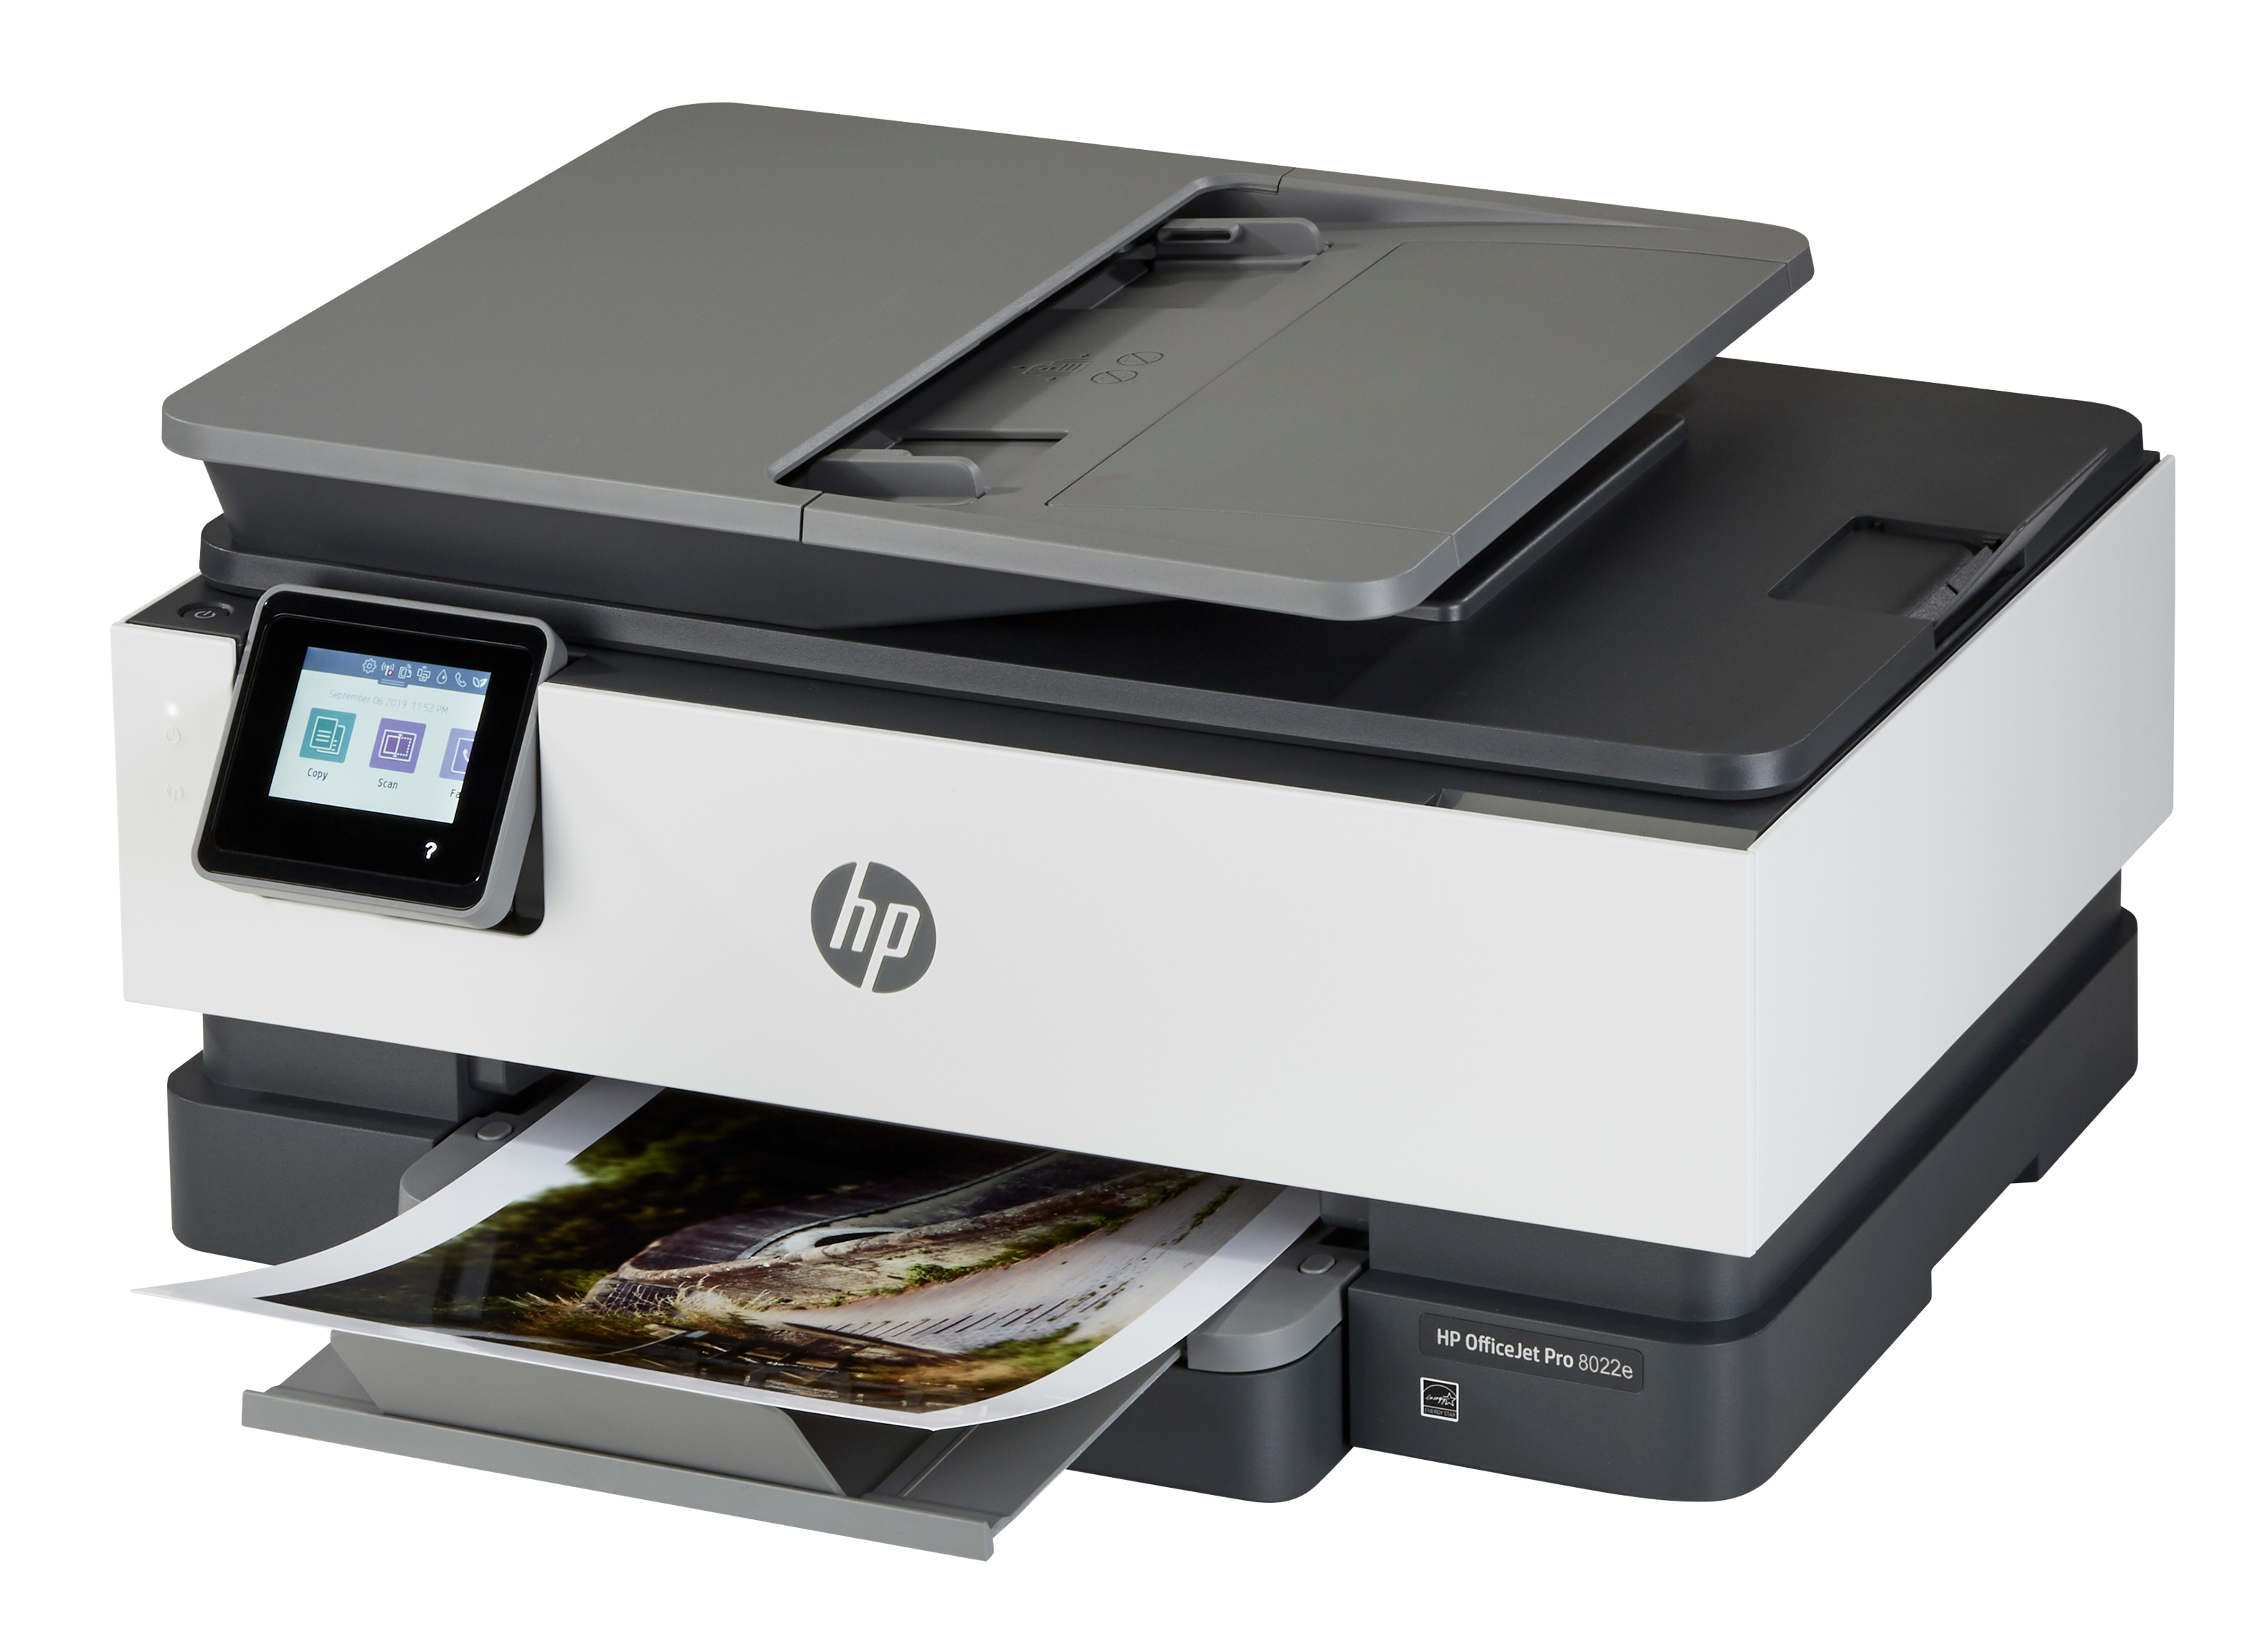 HP Officejet Pro 8022e Printer Review - Consumer Reports